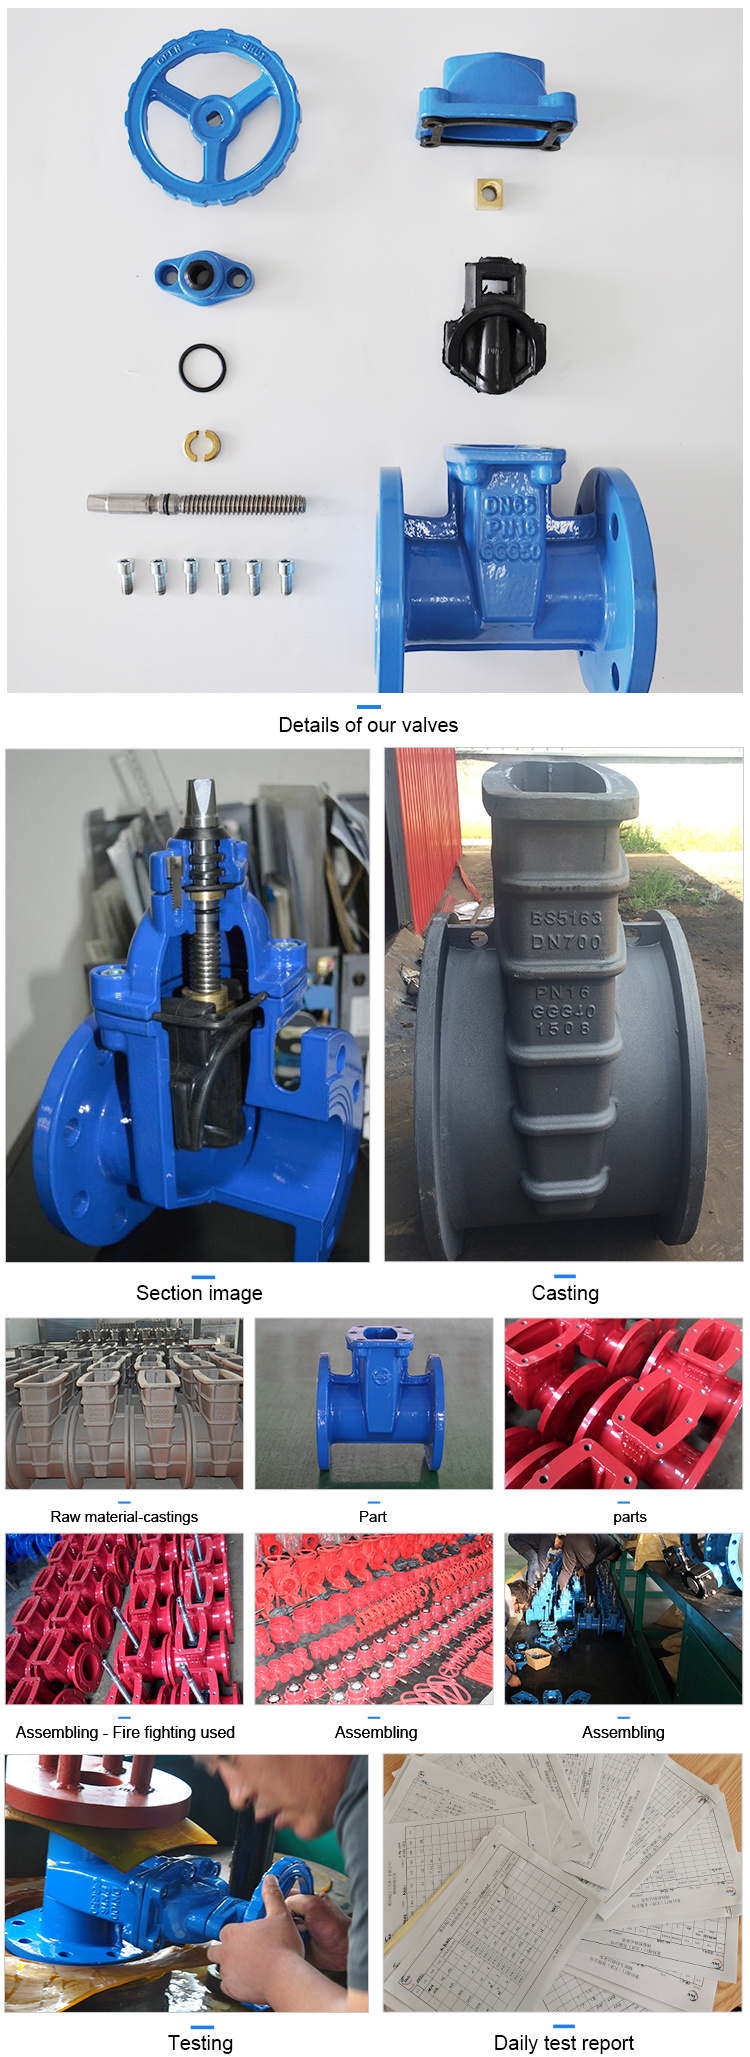 Mud Automatic API600 OS&Y China Manufacturer Bolted Bonnet Low Pressure Gate Valve